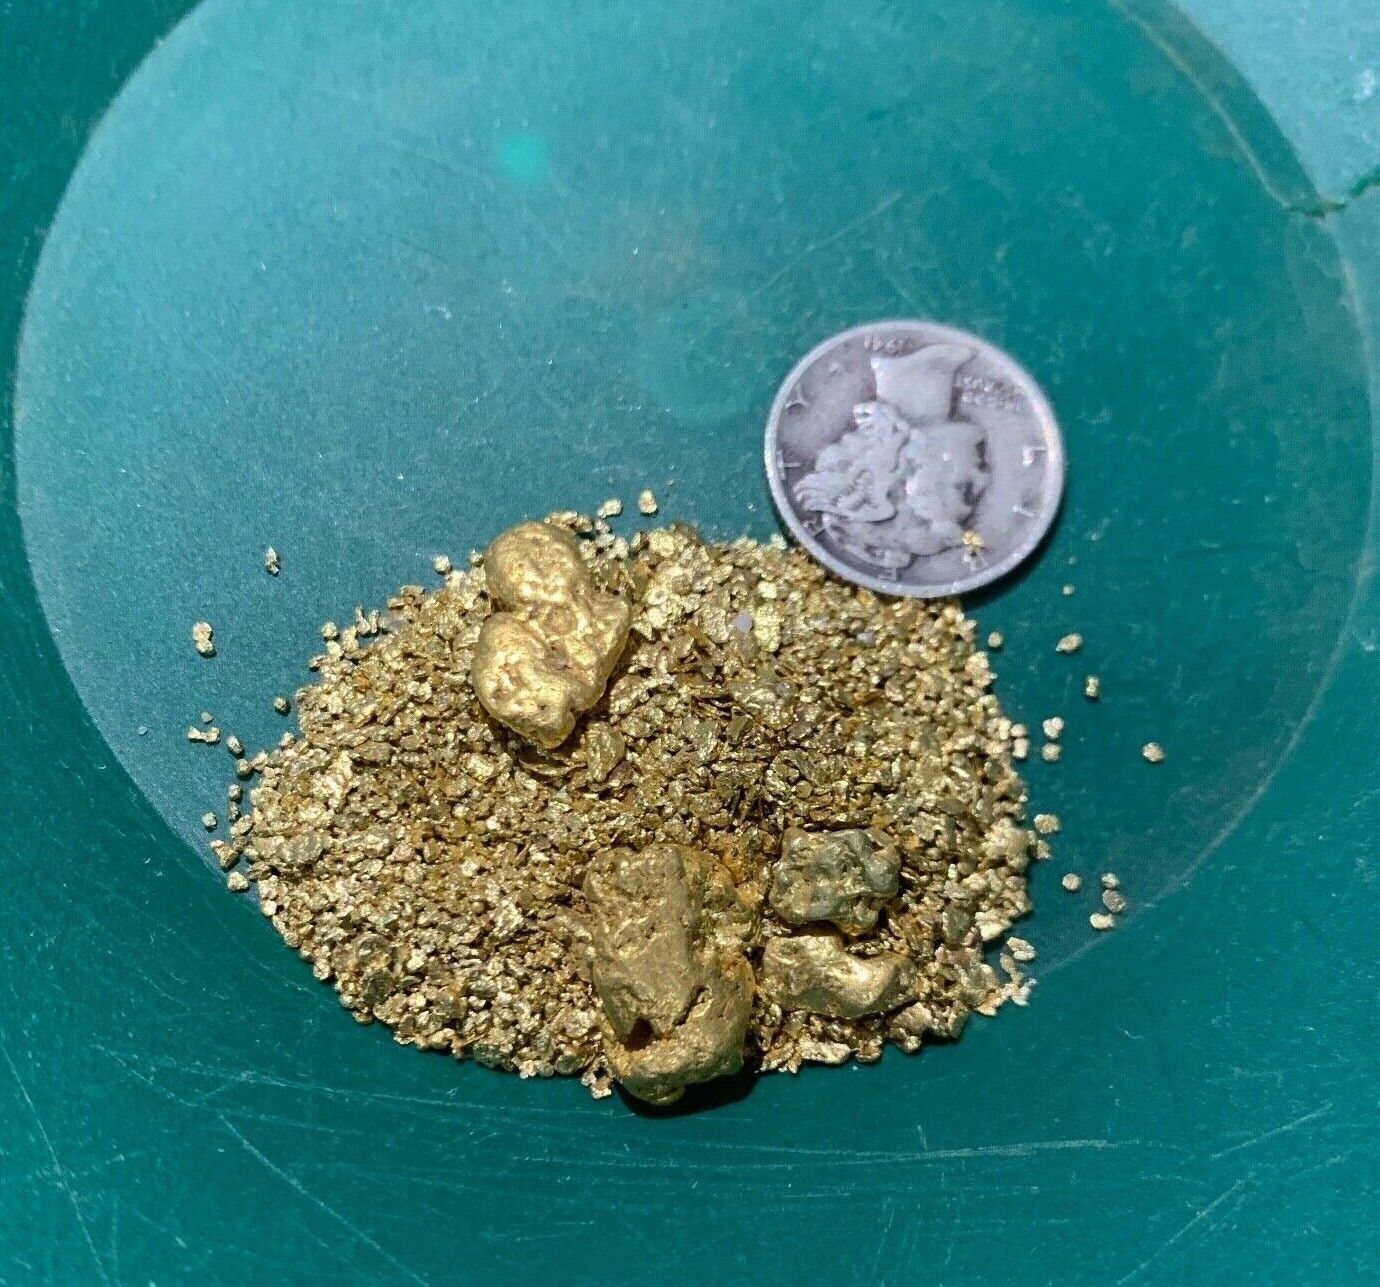 Gold Paydirt 8 lbs Unsearched Guaranteed Gold Panning Pay Dirt Gold Nuggets Bag